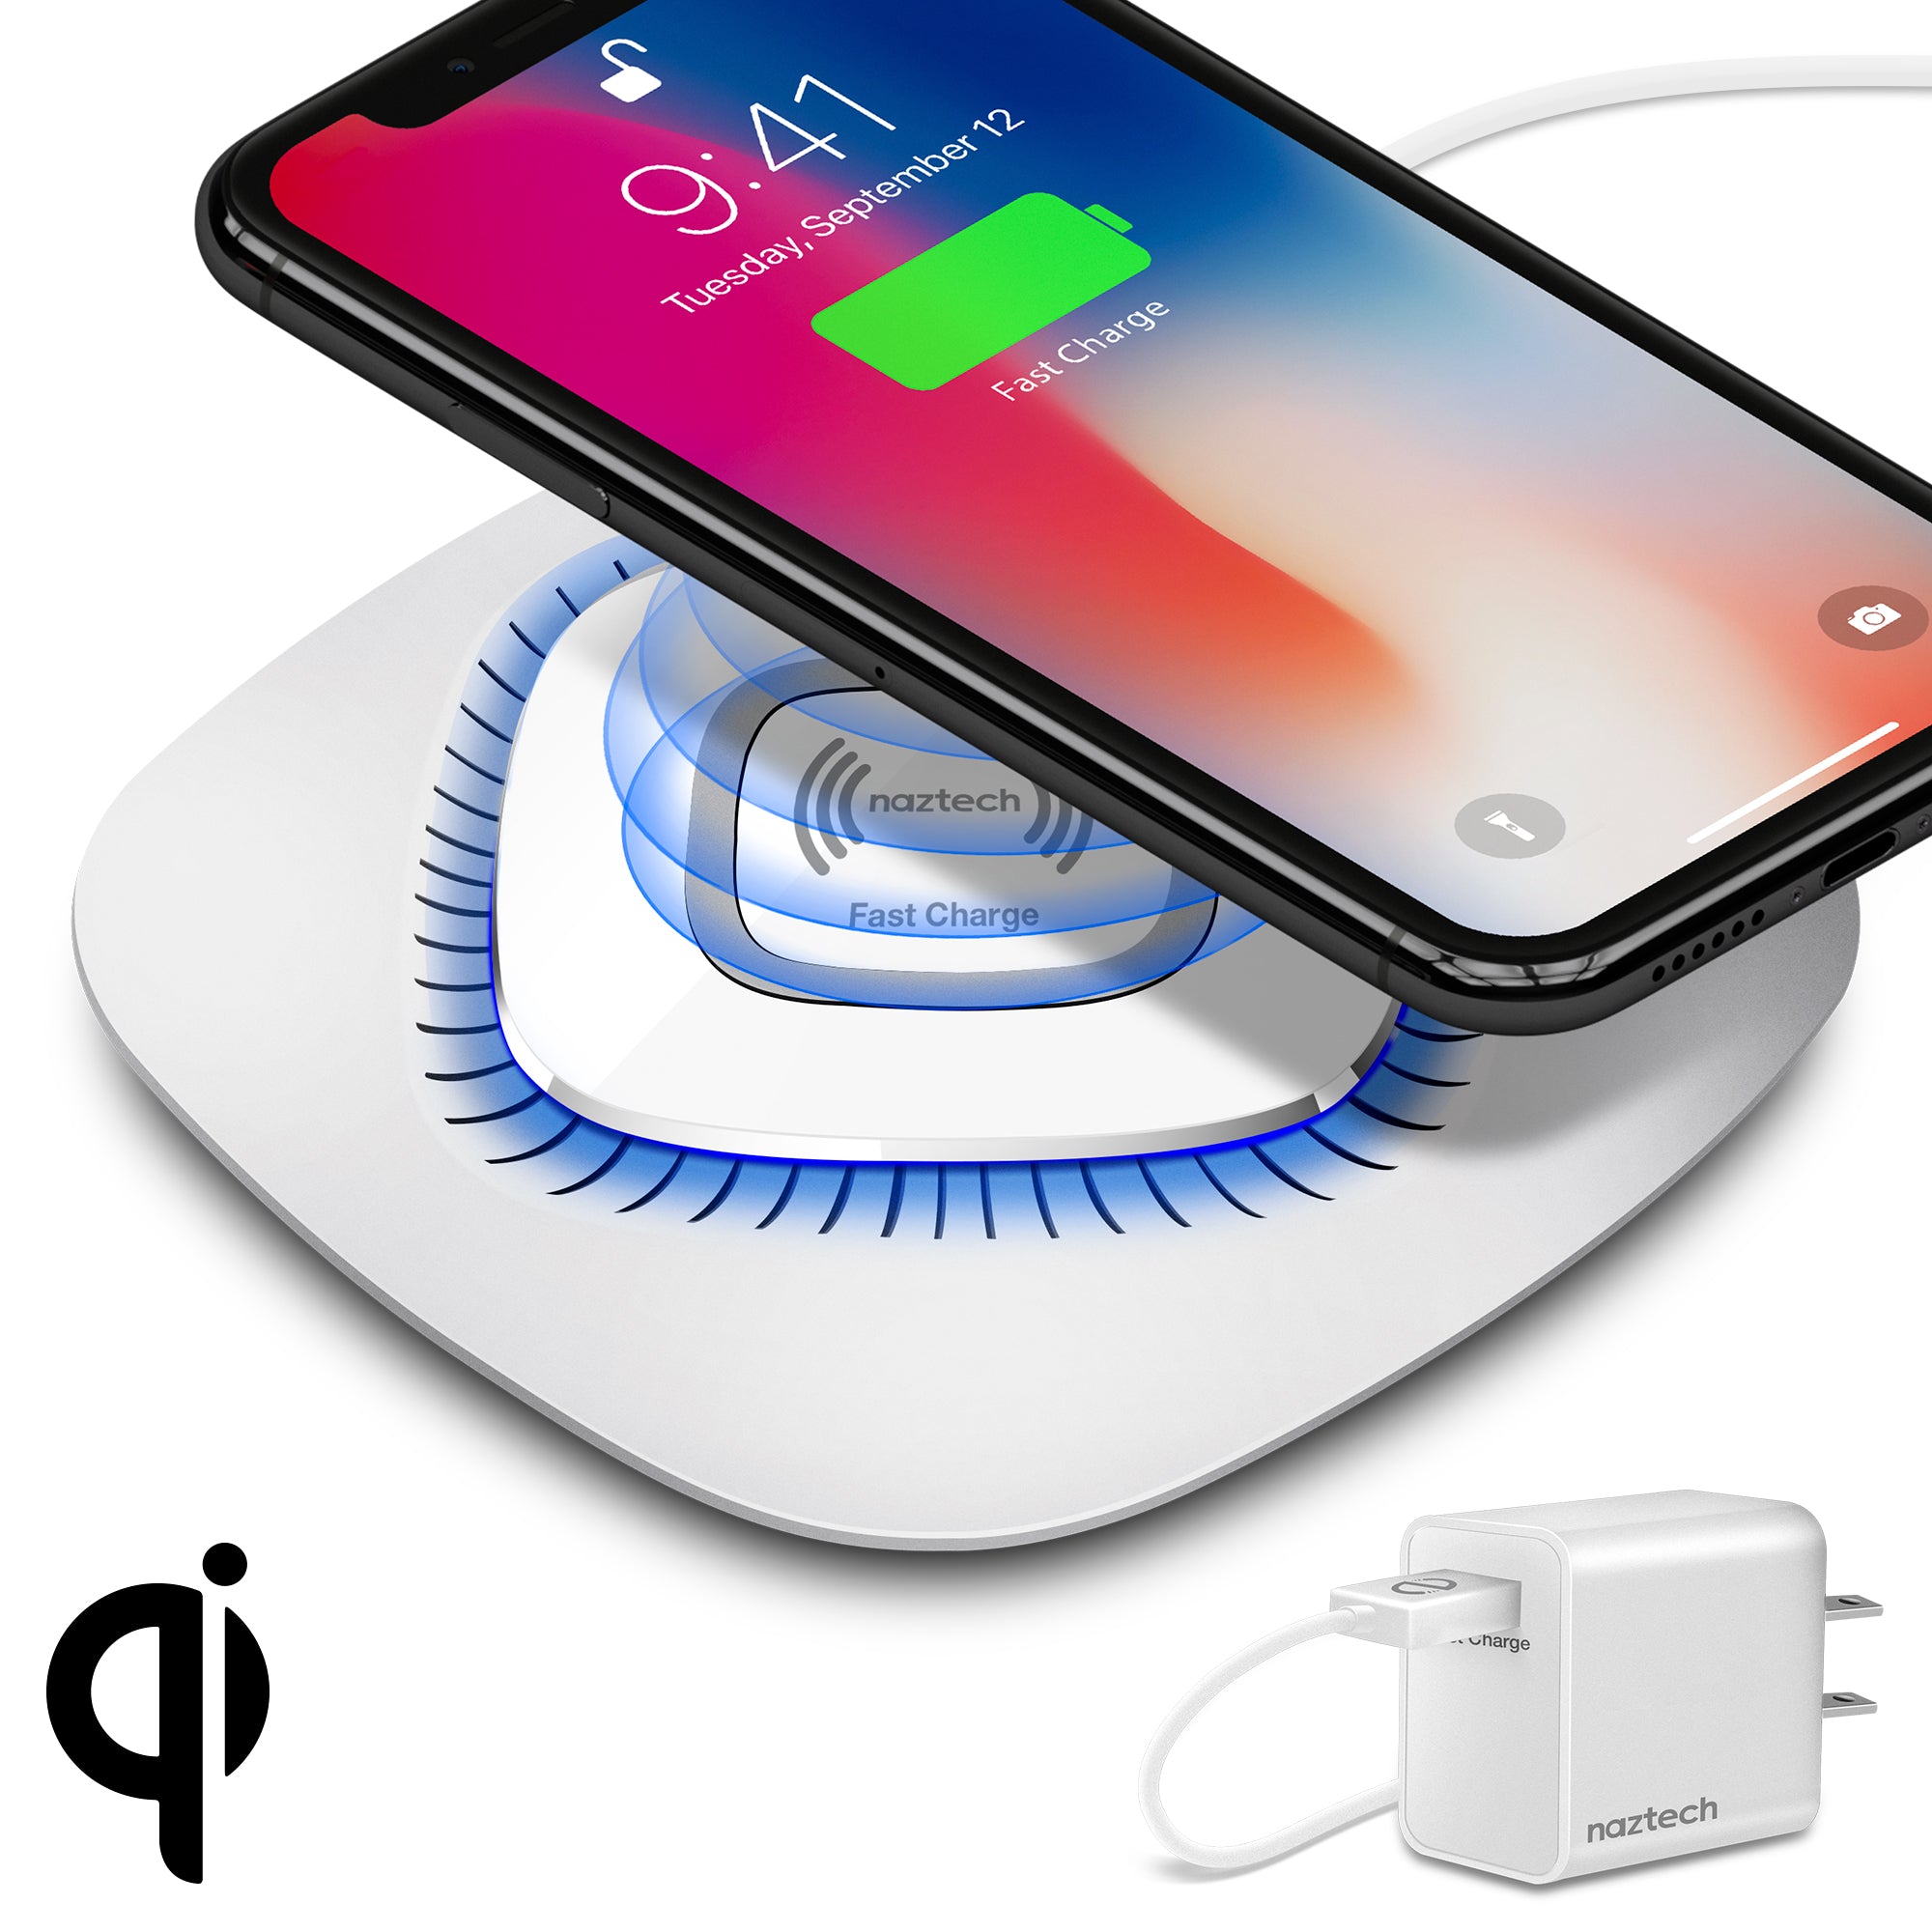 Naztech Power Pad Qi Wireless Fast Charger - White – 